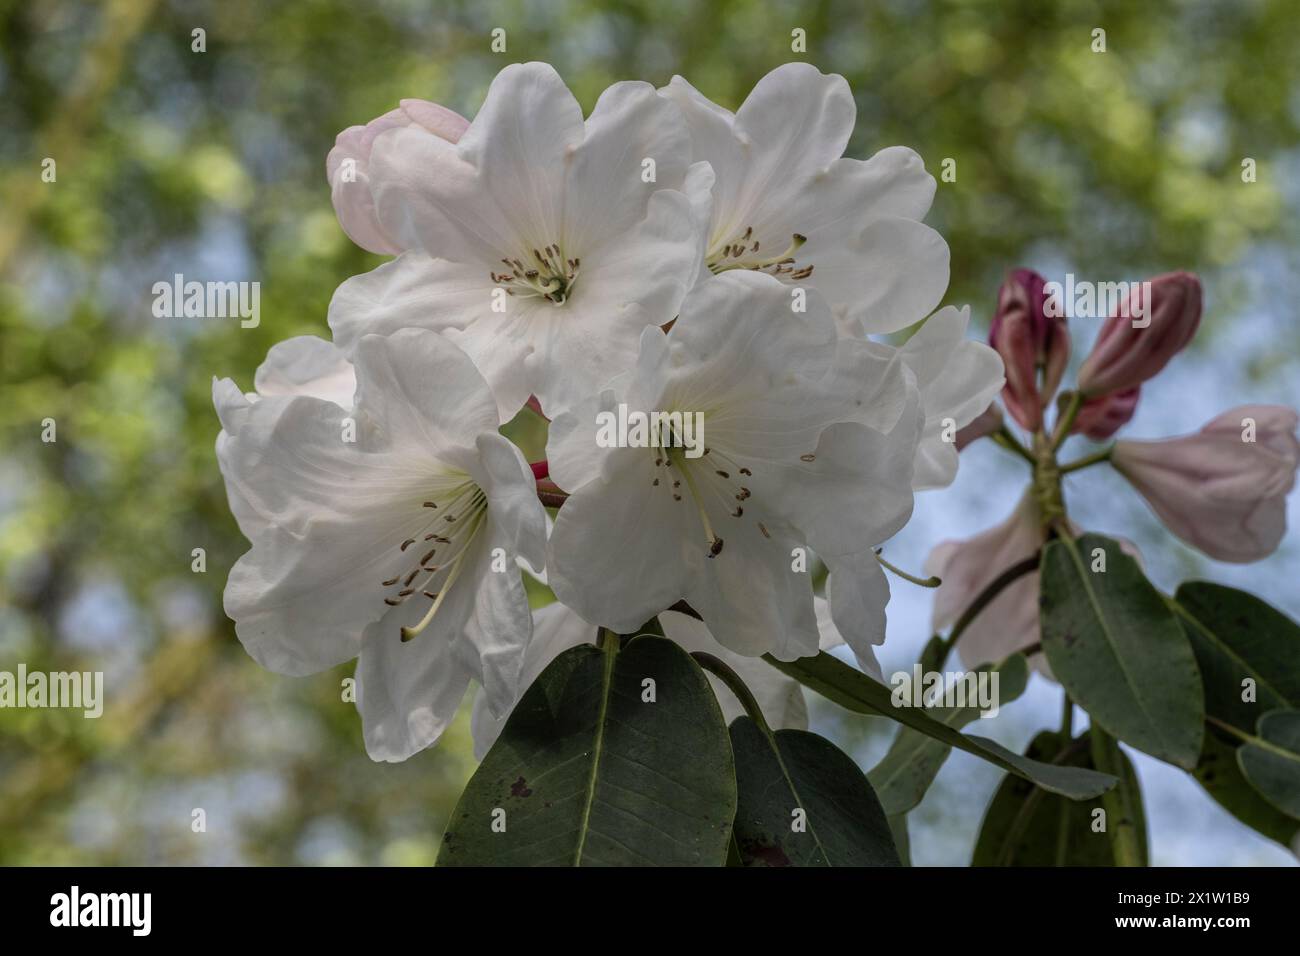 Rhododendron blossom (Rhododendron, hybrid Soulkew), Emsland, Lower Saxony, Germany Stock Photo